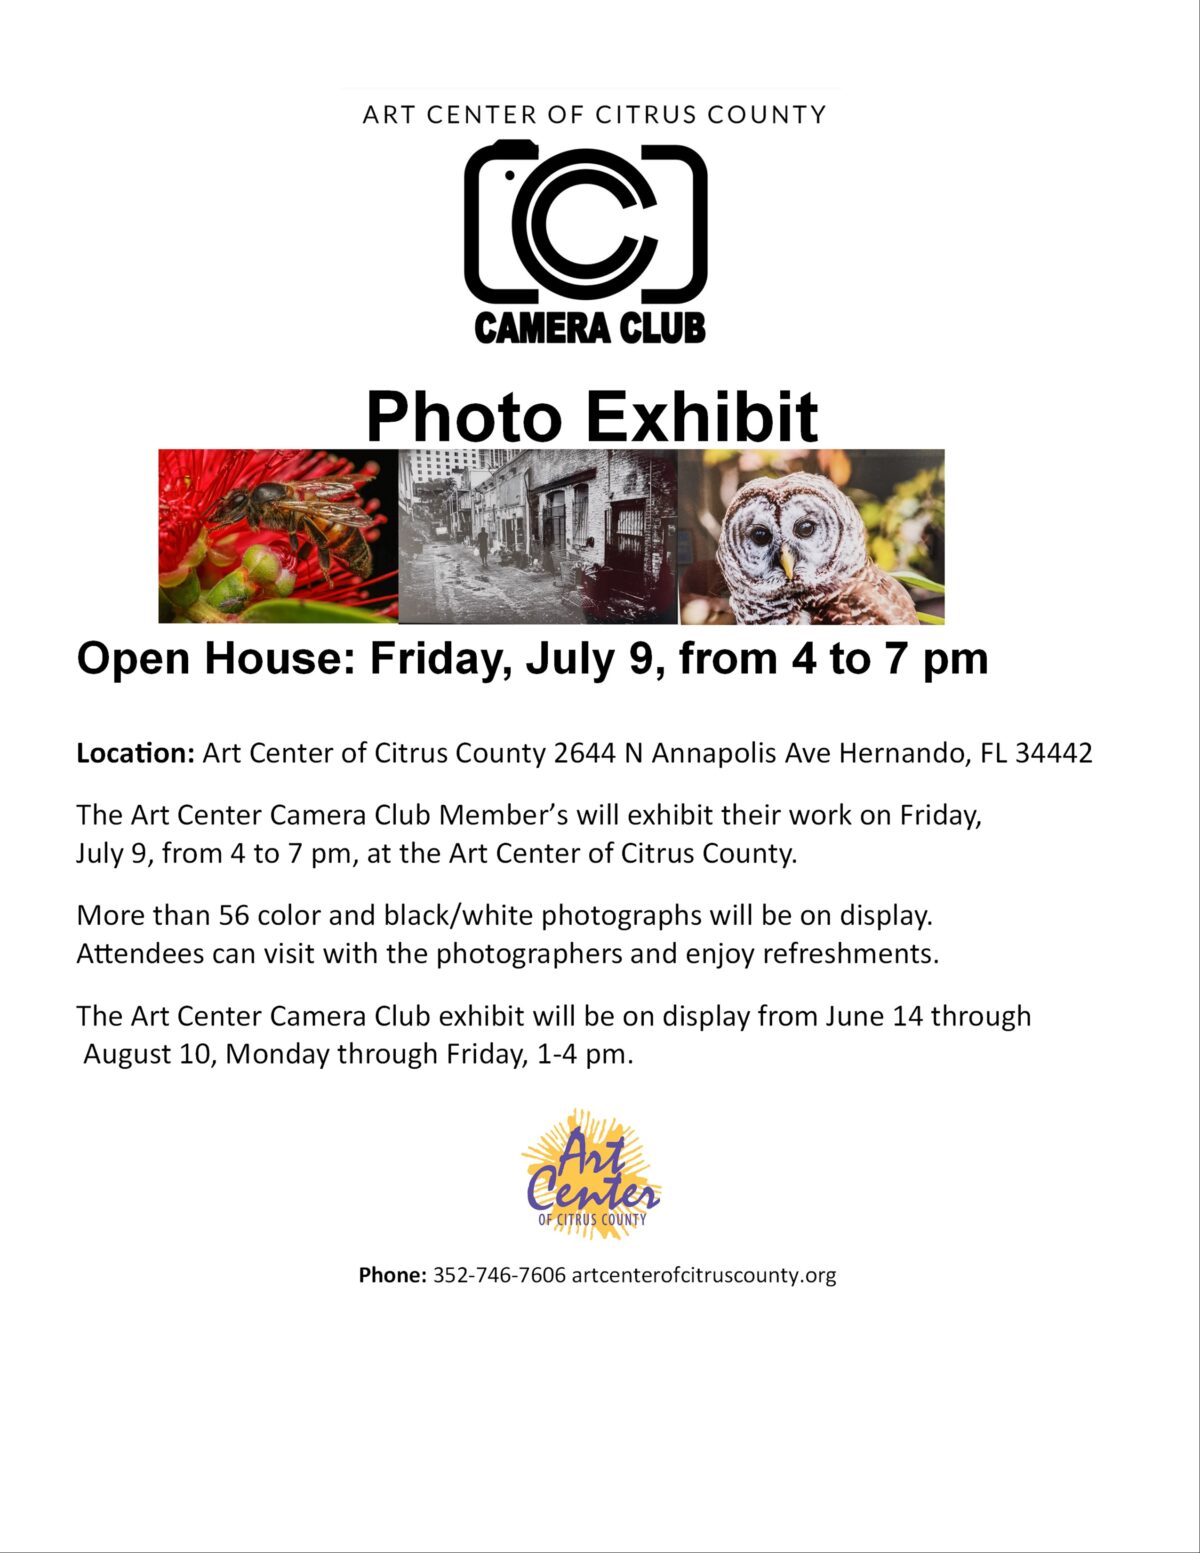 Camera Club Photo Exhibit & Open House: Friday, July 9, from 4 to 7 pm